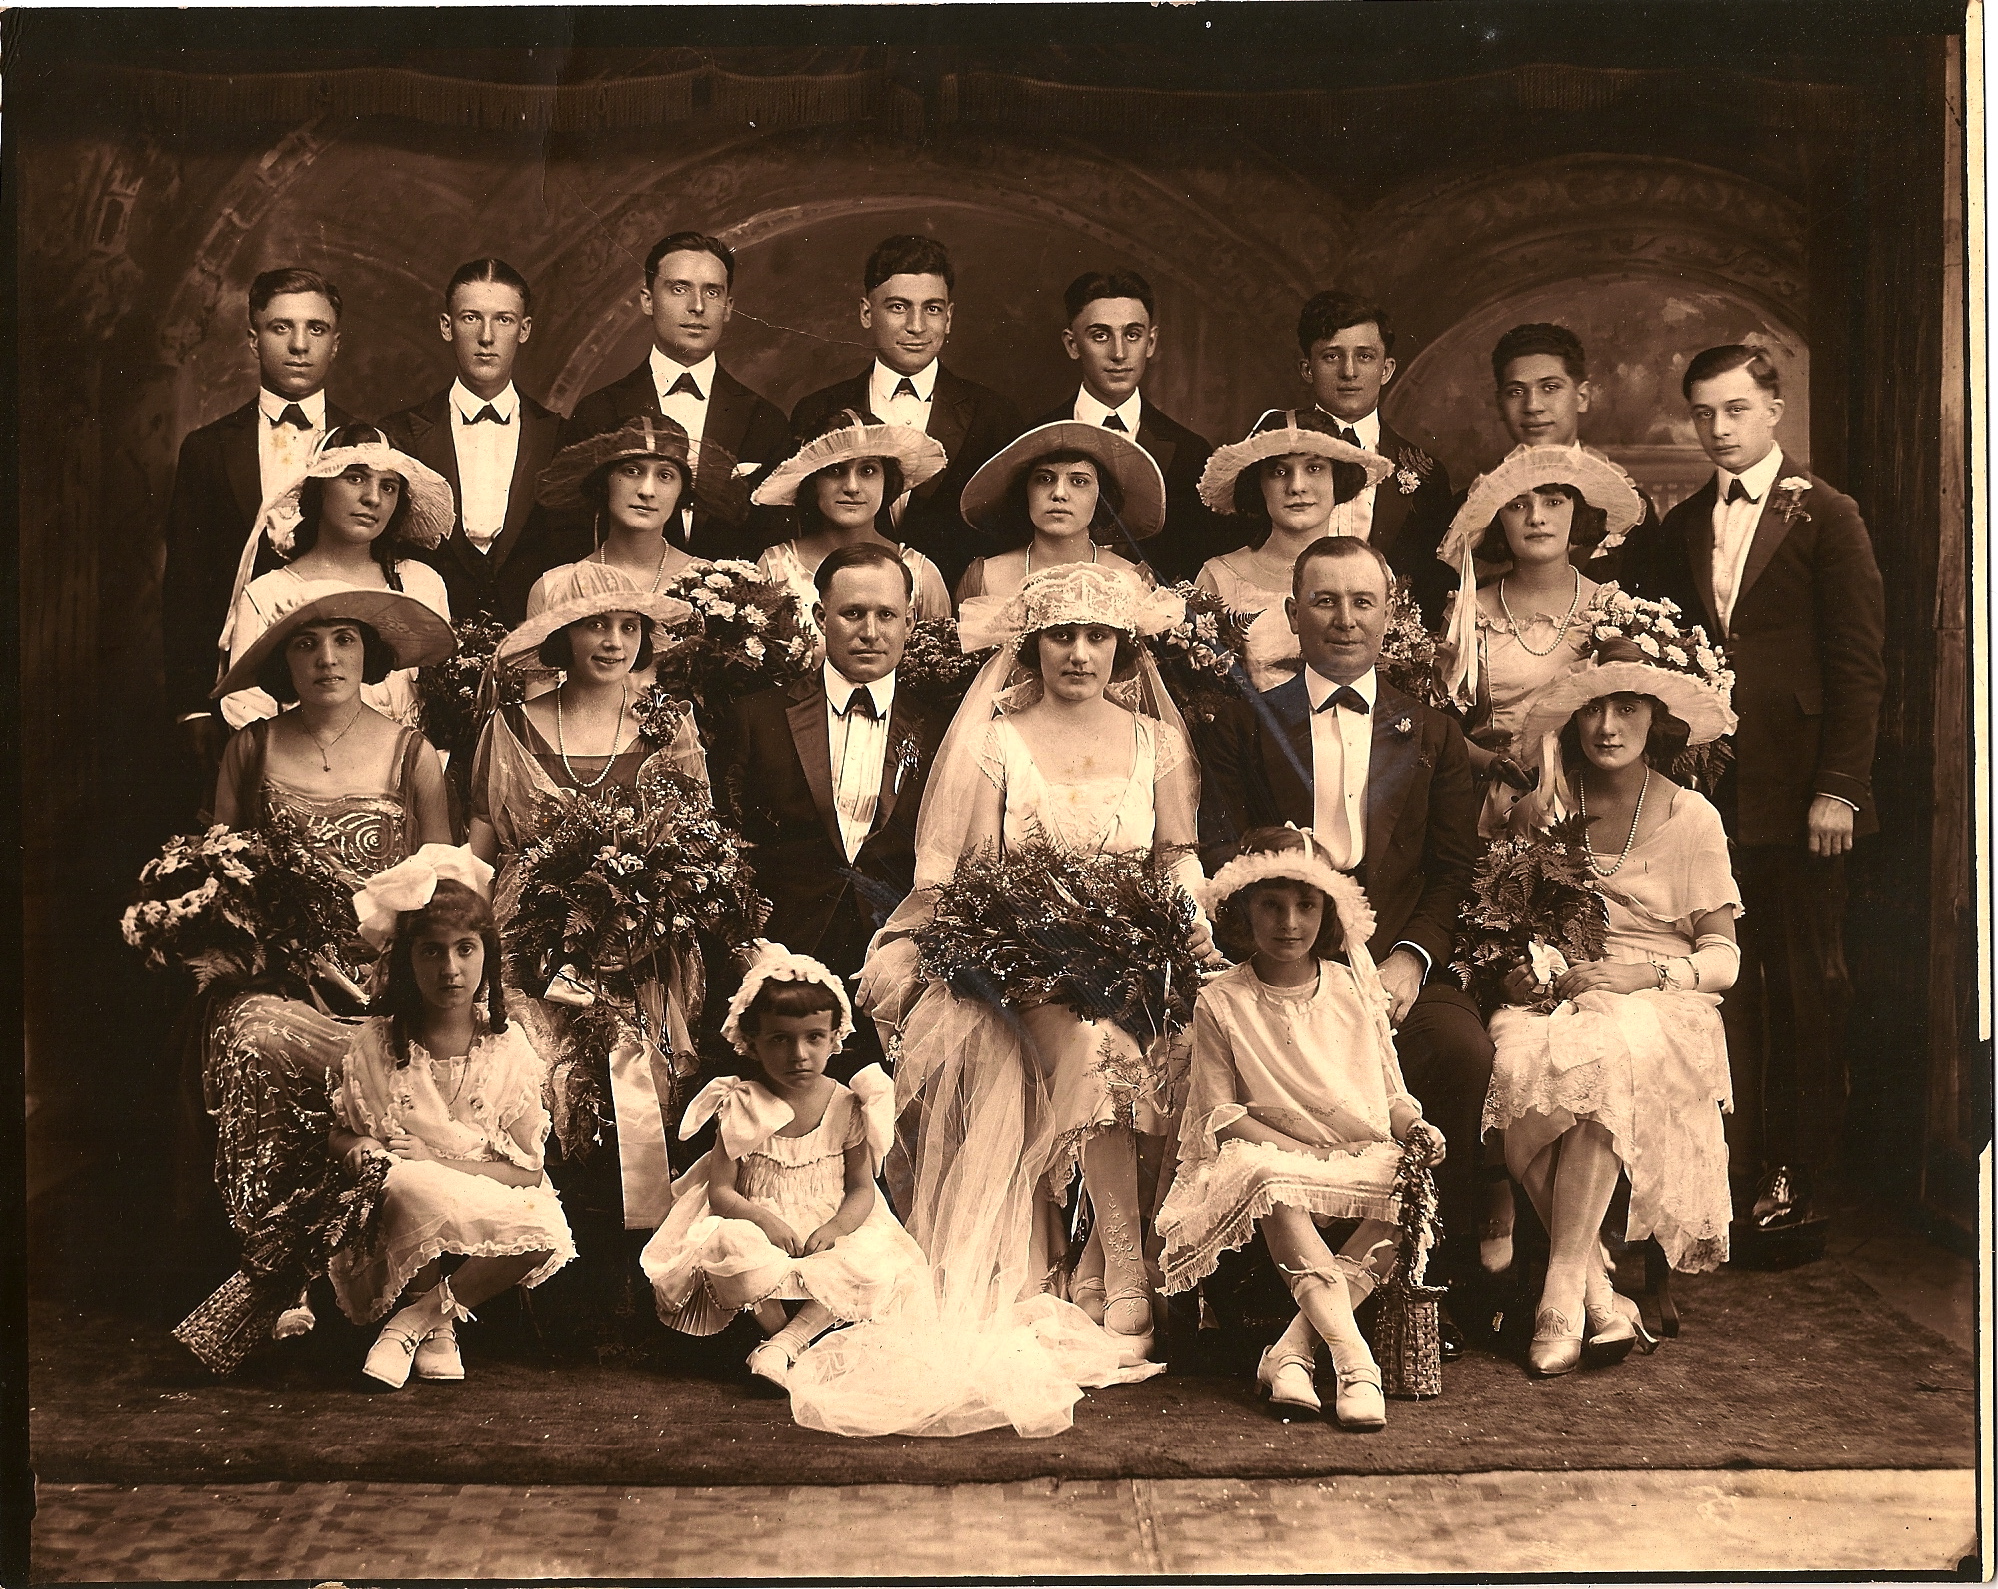 This photo shows the wedding party of my great-grandparents Robert Vanella to Sadie Faranda in New York City, 1920 or 21. The best man (sitting to the bride's left) is one John Torrio. He was said to be my great-grandfather's cousin and was definitely his "business associate." Vanella, also know as Roxy Vanelli owned and operated Vanella Funeral Chapel at 27-29 Madison Street in Manhattan. The funeral home still stands and is operated by distant relatives of mine.  View full size.